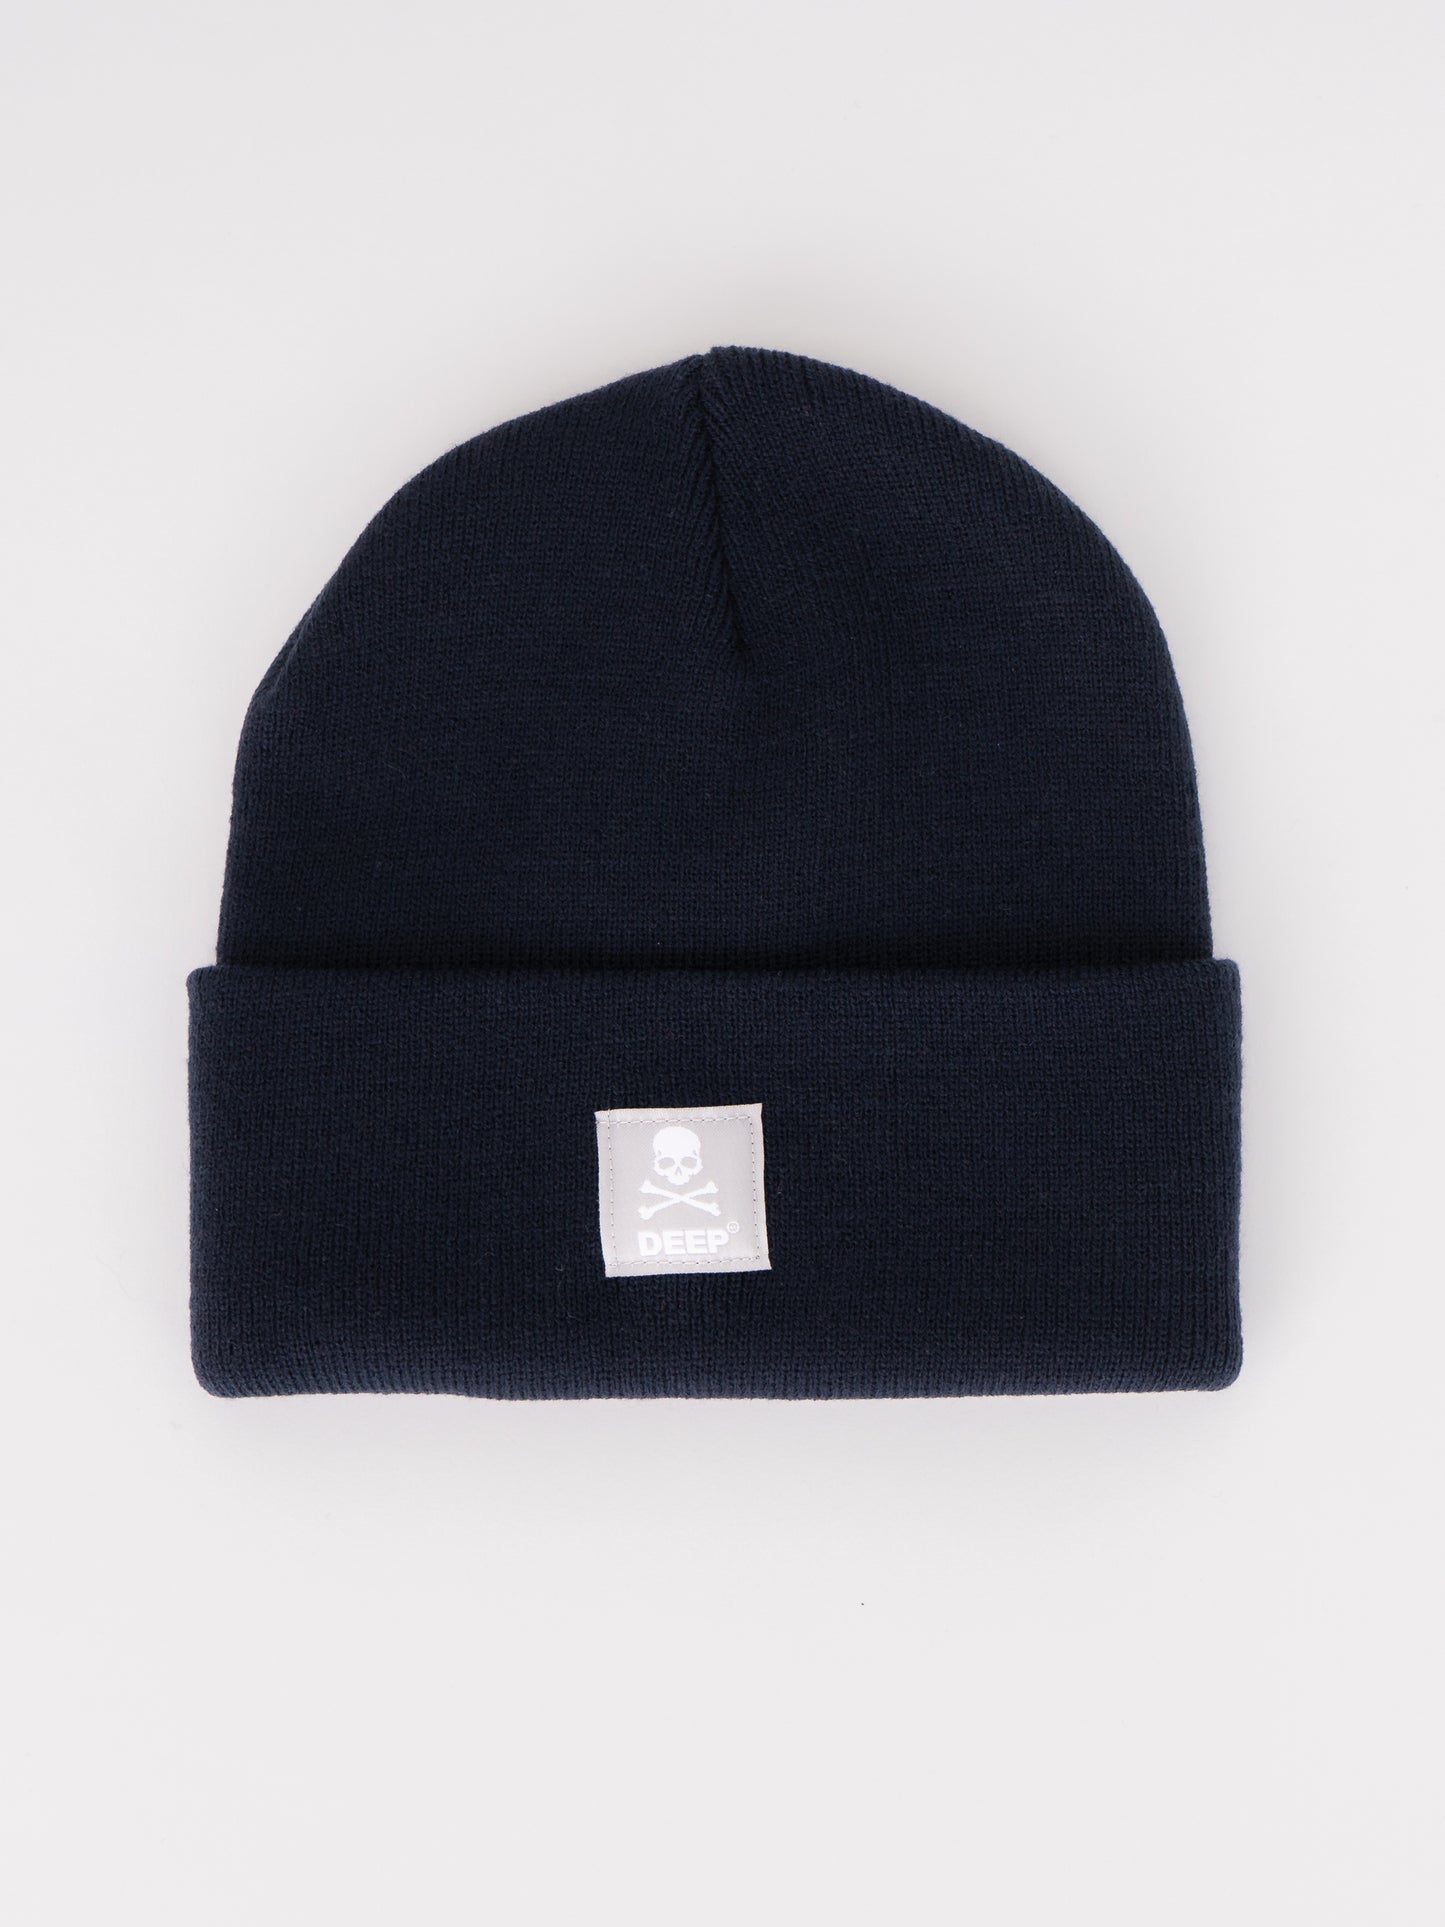 Crossbones Beanie Hat - French Navy - DEEP Clothing